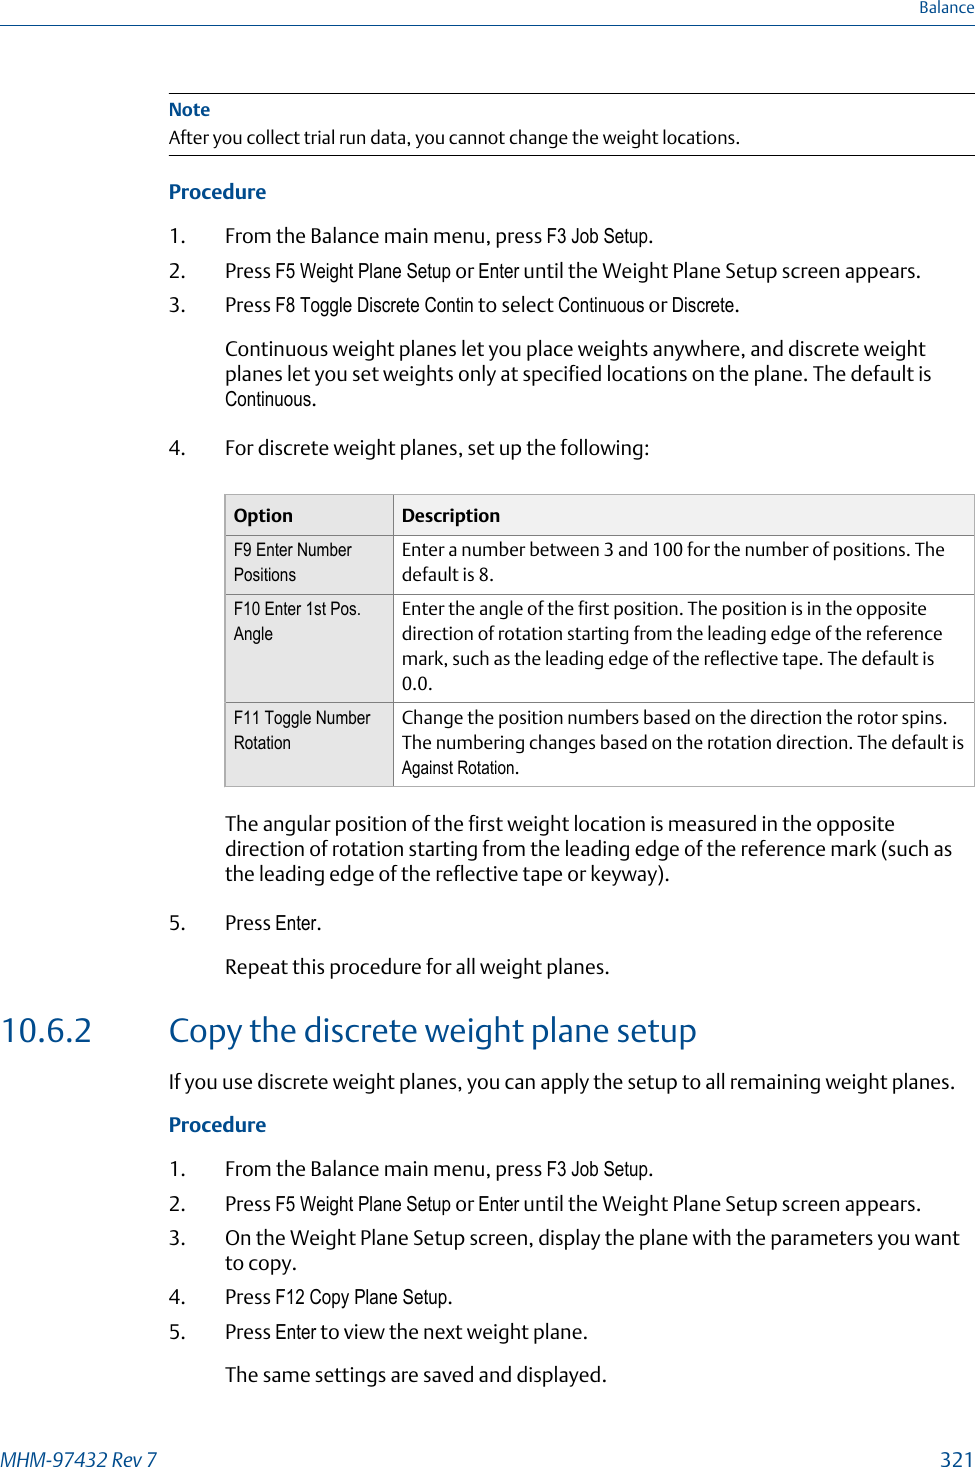 NoteAfter you collect trial run data, you cannot change the weight locations.Procedure1. From the Balance main menu, press F3 Job Setup.2. Press F5 Weight Plane Setup or Enter until the Weight Plane Setup screen appears.3. Press F8 Toggle Discrete Contin to select Continuous or Discrete.Continuous weight planes let you place weights anywhere, and discrete weightplanes let you set weights only at specified locations on the plane. The default isContinuous.4. For discrete weight planes, set up the following:Option DescriptionF9 Enter NumberPositionsEnter a number between 3 and 100 for the number of positions. Thedefault is 8.F10 Enter 1st Pos.AngleEnter the angle of the first position. The position is in the oppositedirection of rotation starting from the leading edge of the referencemark, such as the leading edge of the reflective tape. The default is0.0.F11 Toggle NumberRotationChange the position numbers based on the direction the rotor spins.The numbering changes based on the rotation direction. The default isAgainst Rotation.The angular position of the first weight location is measured in the oppositedirection of rotation starting from the leading edge of the reference mark (such asthe leading edge of the reflective tape or keyway).5. Press Enter.Repeat this procedure for all weight planes.10.6.2 Copy the discrete weight plane setupIf you use discrete weight planes, you can apply the setup to all remaining weight planes.Procedure1. From the Balance main menu, press F3 Job Setup.2. Press F5 Weight Plane Setup or Enter until the Weight Plane Setup screen appears.3. On the Weight Plane Setup screen, display the plane with the parameters you wantto copy.4. Press F12 Copy Plane Setup.5. Press Enter to view the next weight plane.The same settings are saved and displayed.BalanceMHM-97432 Rev 7  321